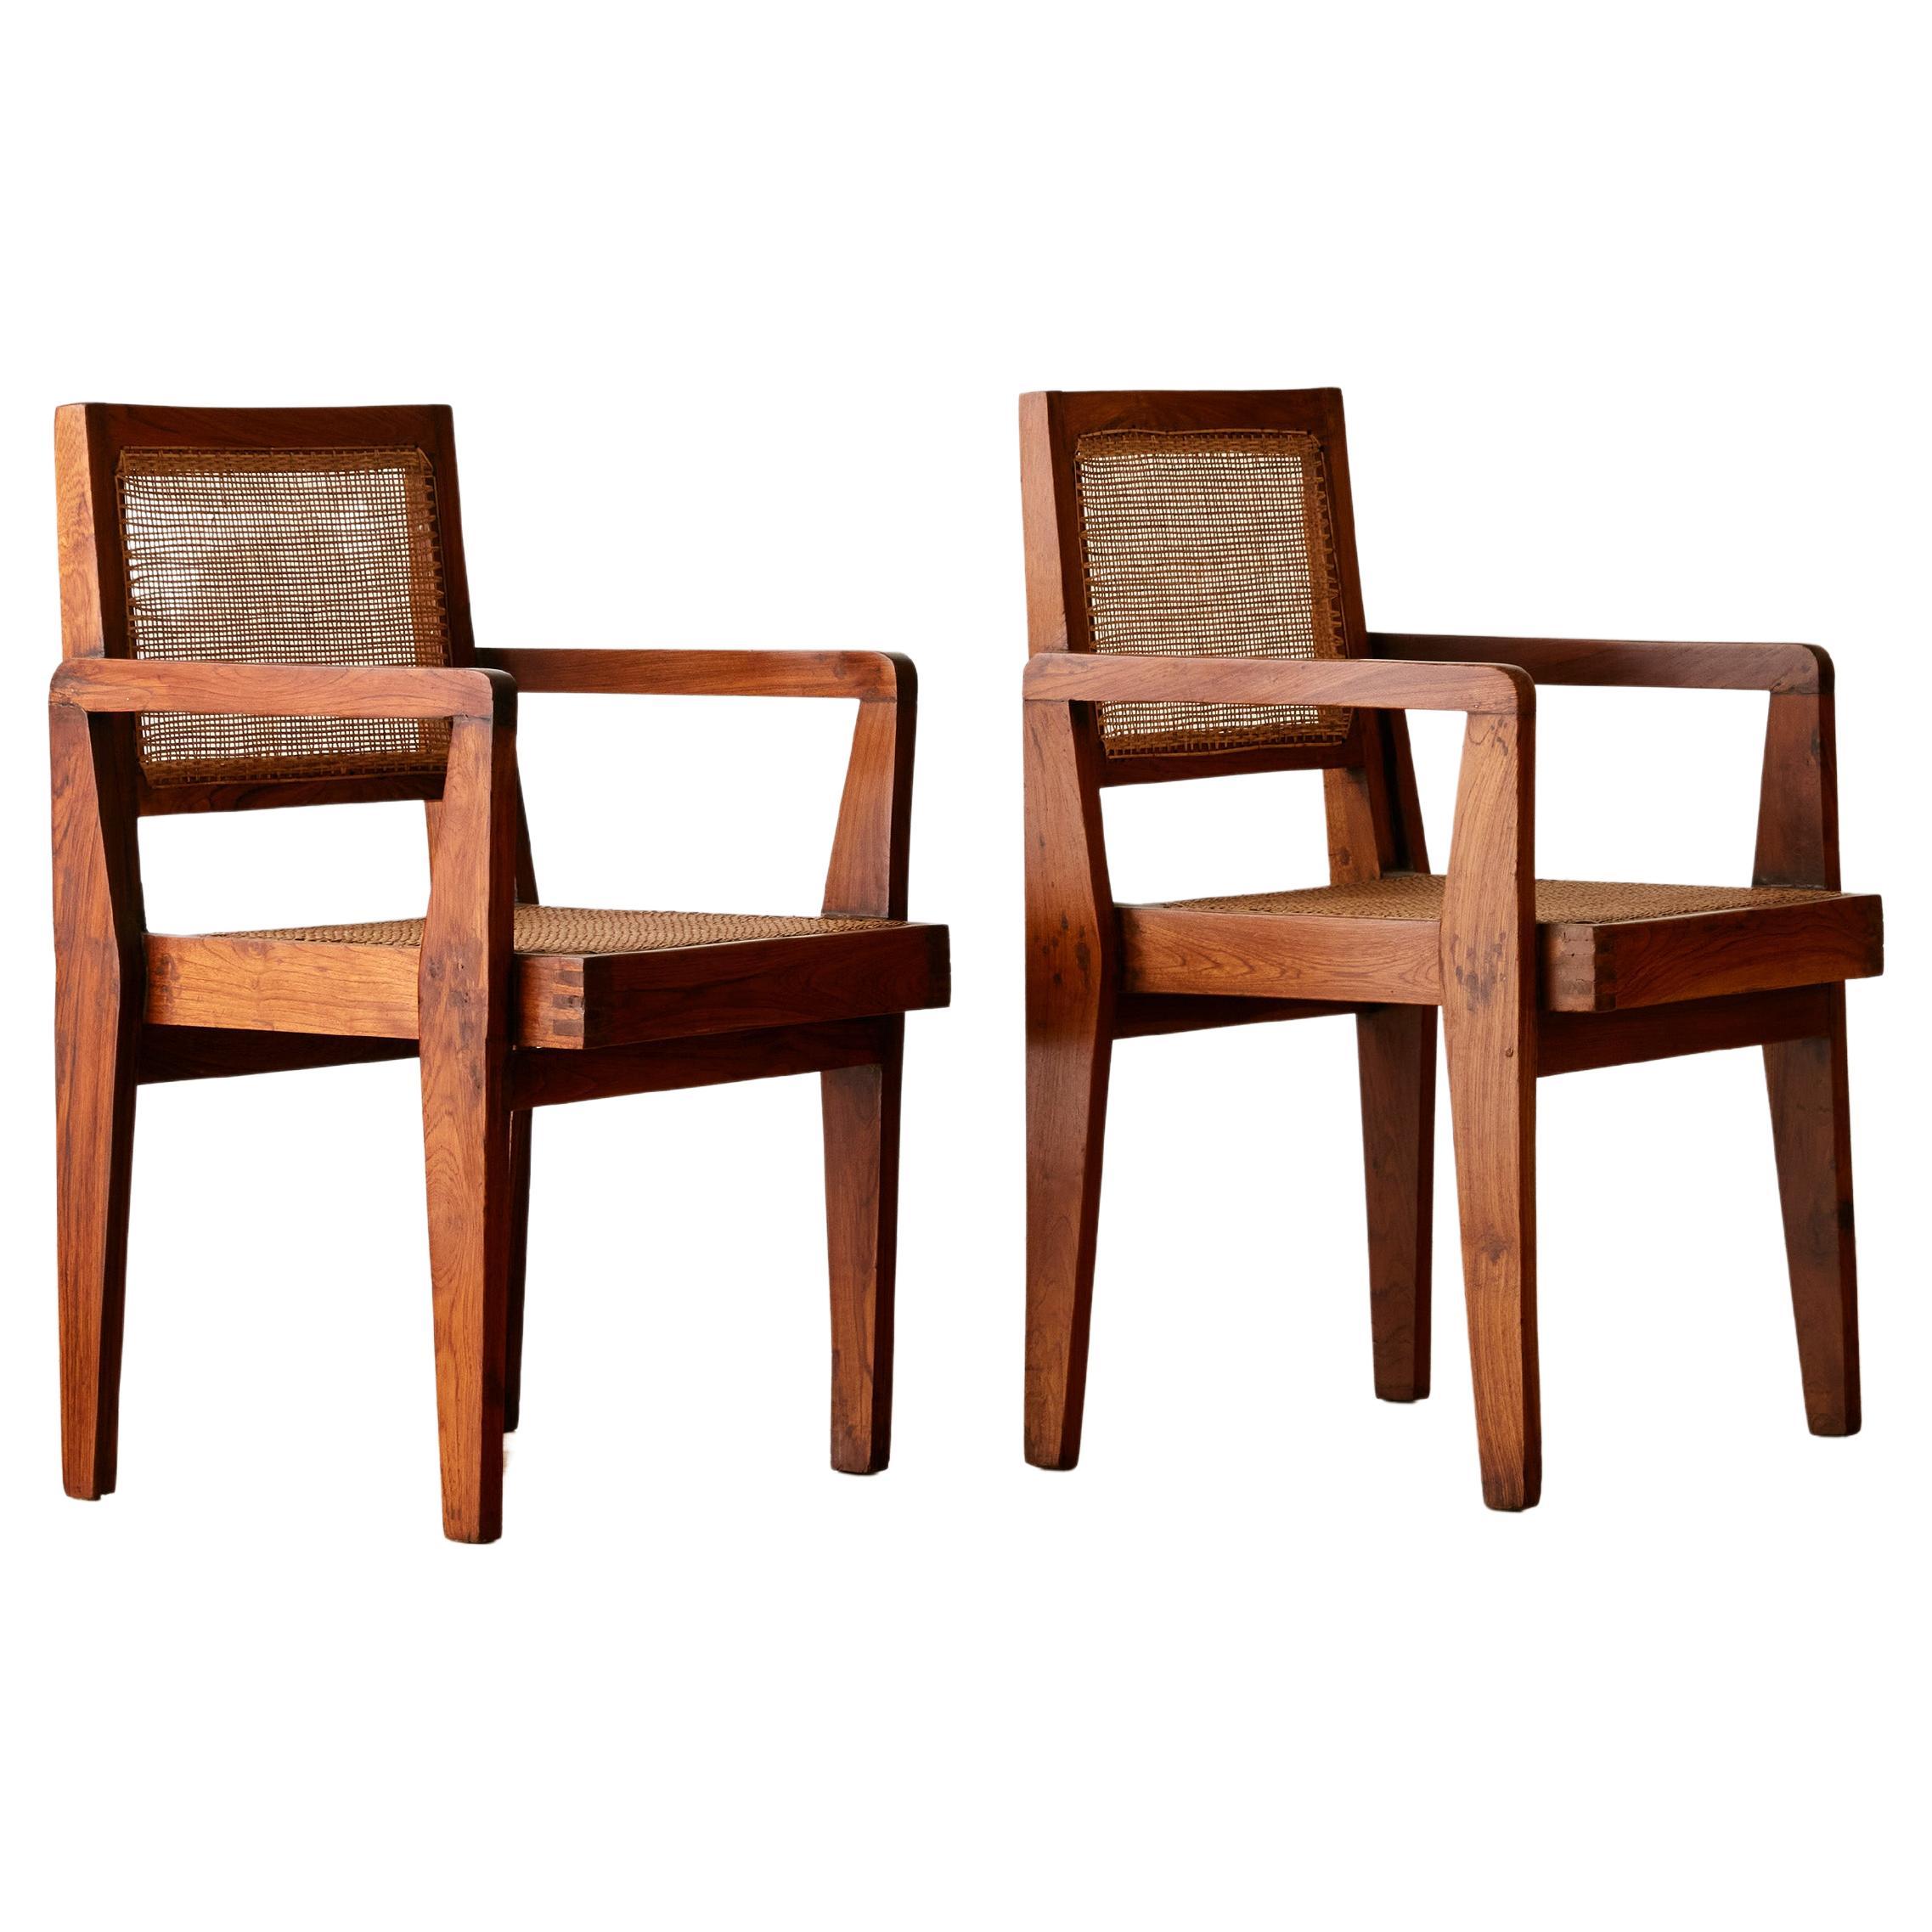 A Pair of Handcrafted Take Down Chairs by Pierre Jeanneret ( Model PJ-SI-20-A)